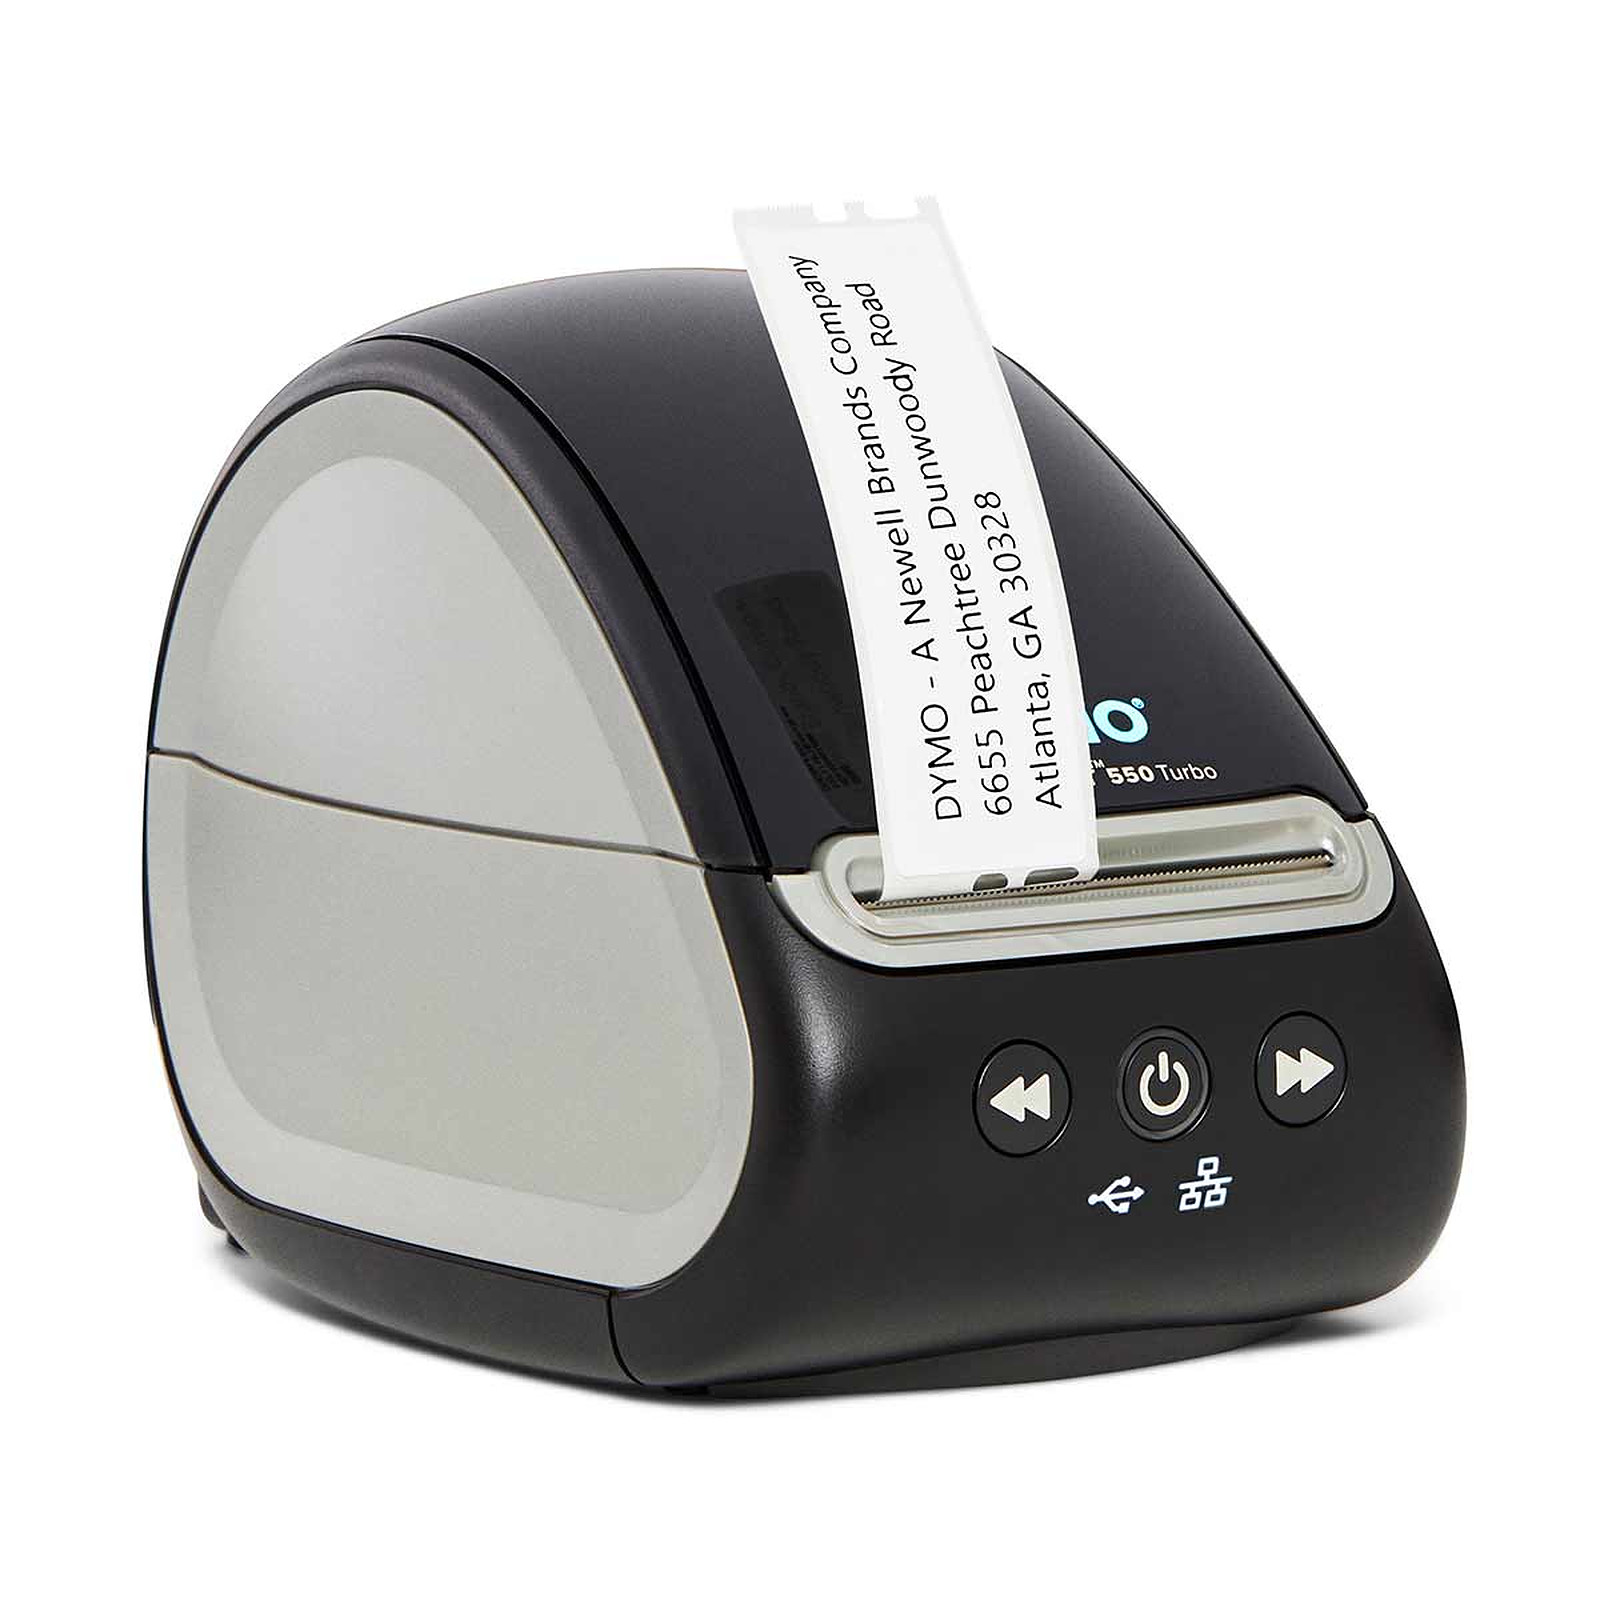 DYMO LabelWriter 550 Turbo - Imprimante thermique DYMO - Occasion